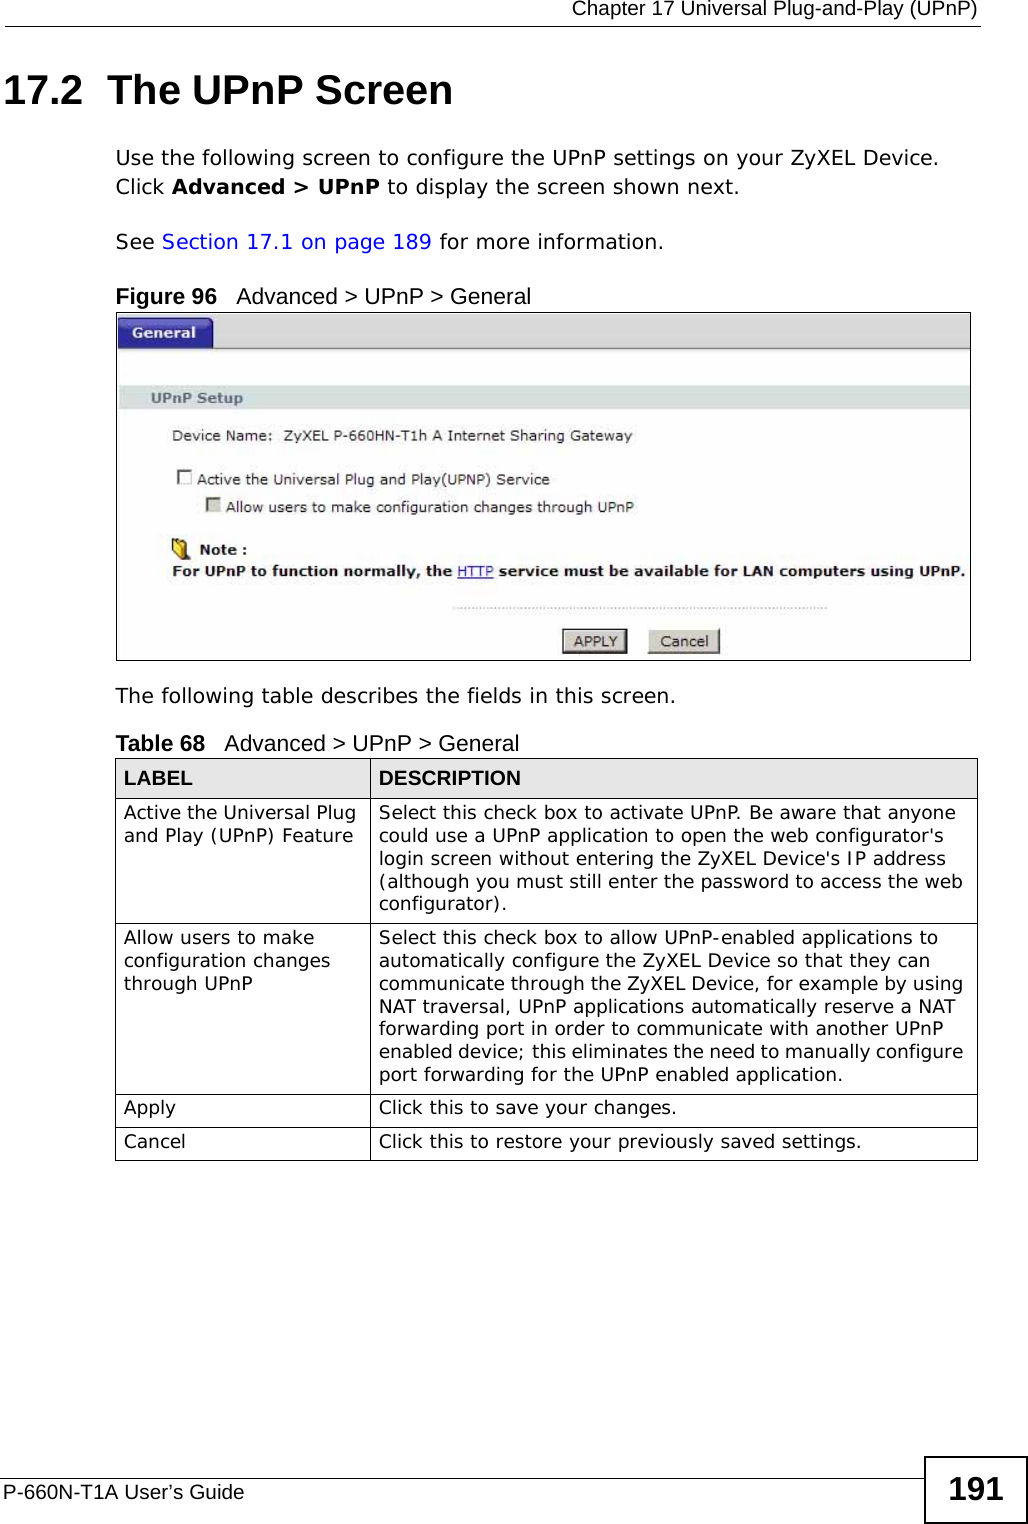  Chapter 17 Universal Plug-and-Play (UPnP)P-660N-T1A User’s Guide 19117.2  The UPnP ScreenUse the following screen to configure the UPnP settings on your ZyXEL Device. Click Advanced &gt; UPnP to display the screen shown next.See Section 17.1 on page 189 for more information. Figure 96   Advanced &gt; UPnP &gt; GeneralThe following table describes the fields in this screen. Table 68   Advanced &gt; UPnP &gt; GeneralLABEL DESCRIPTIONActive the Universal Plug and Play (UPnP) Feature Select this check box to activate UPnP. Be aware that anyone could use a UPnP application to open the web configurator&apos;s login screen without entering the ZyXEL Device&apos;s IP address (although you must still enter the password to access the web configurator).Allow users to make configuration changes through UPnPSelect this check box to allow UPnP-enabled applications to automatically configure the ZyXEL Device so that they can communicate through the ZyXEL Device, for example by using NAT traversal, UPnP applications automatically reserve a NAT forwarding port in order to communicate with another UPnP enabled device; this eliminates the need to manually configure port forwarding for the UPnP enabled application. Apply Click this to save your changes.Cancel Click this to restore your previously saved settings.